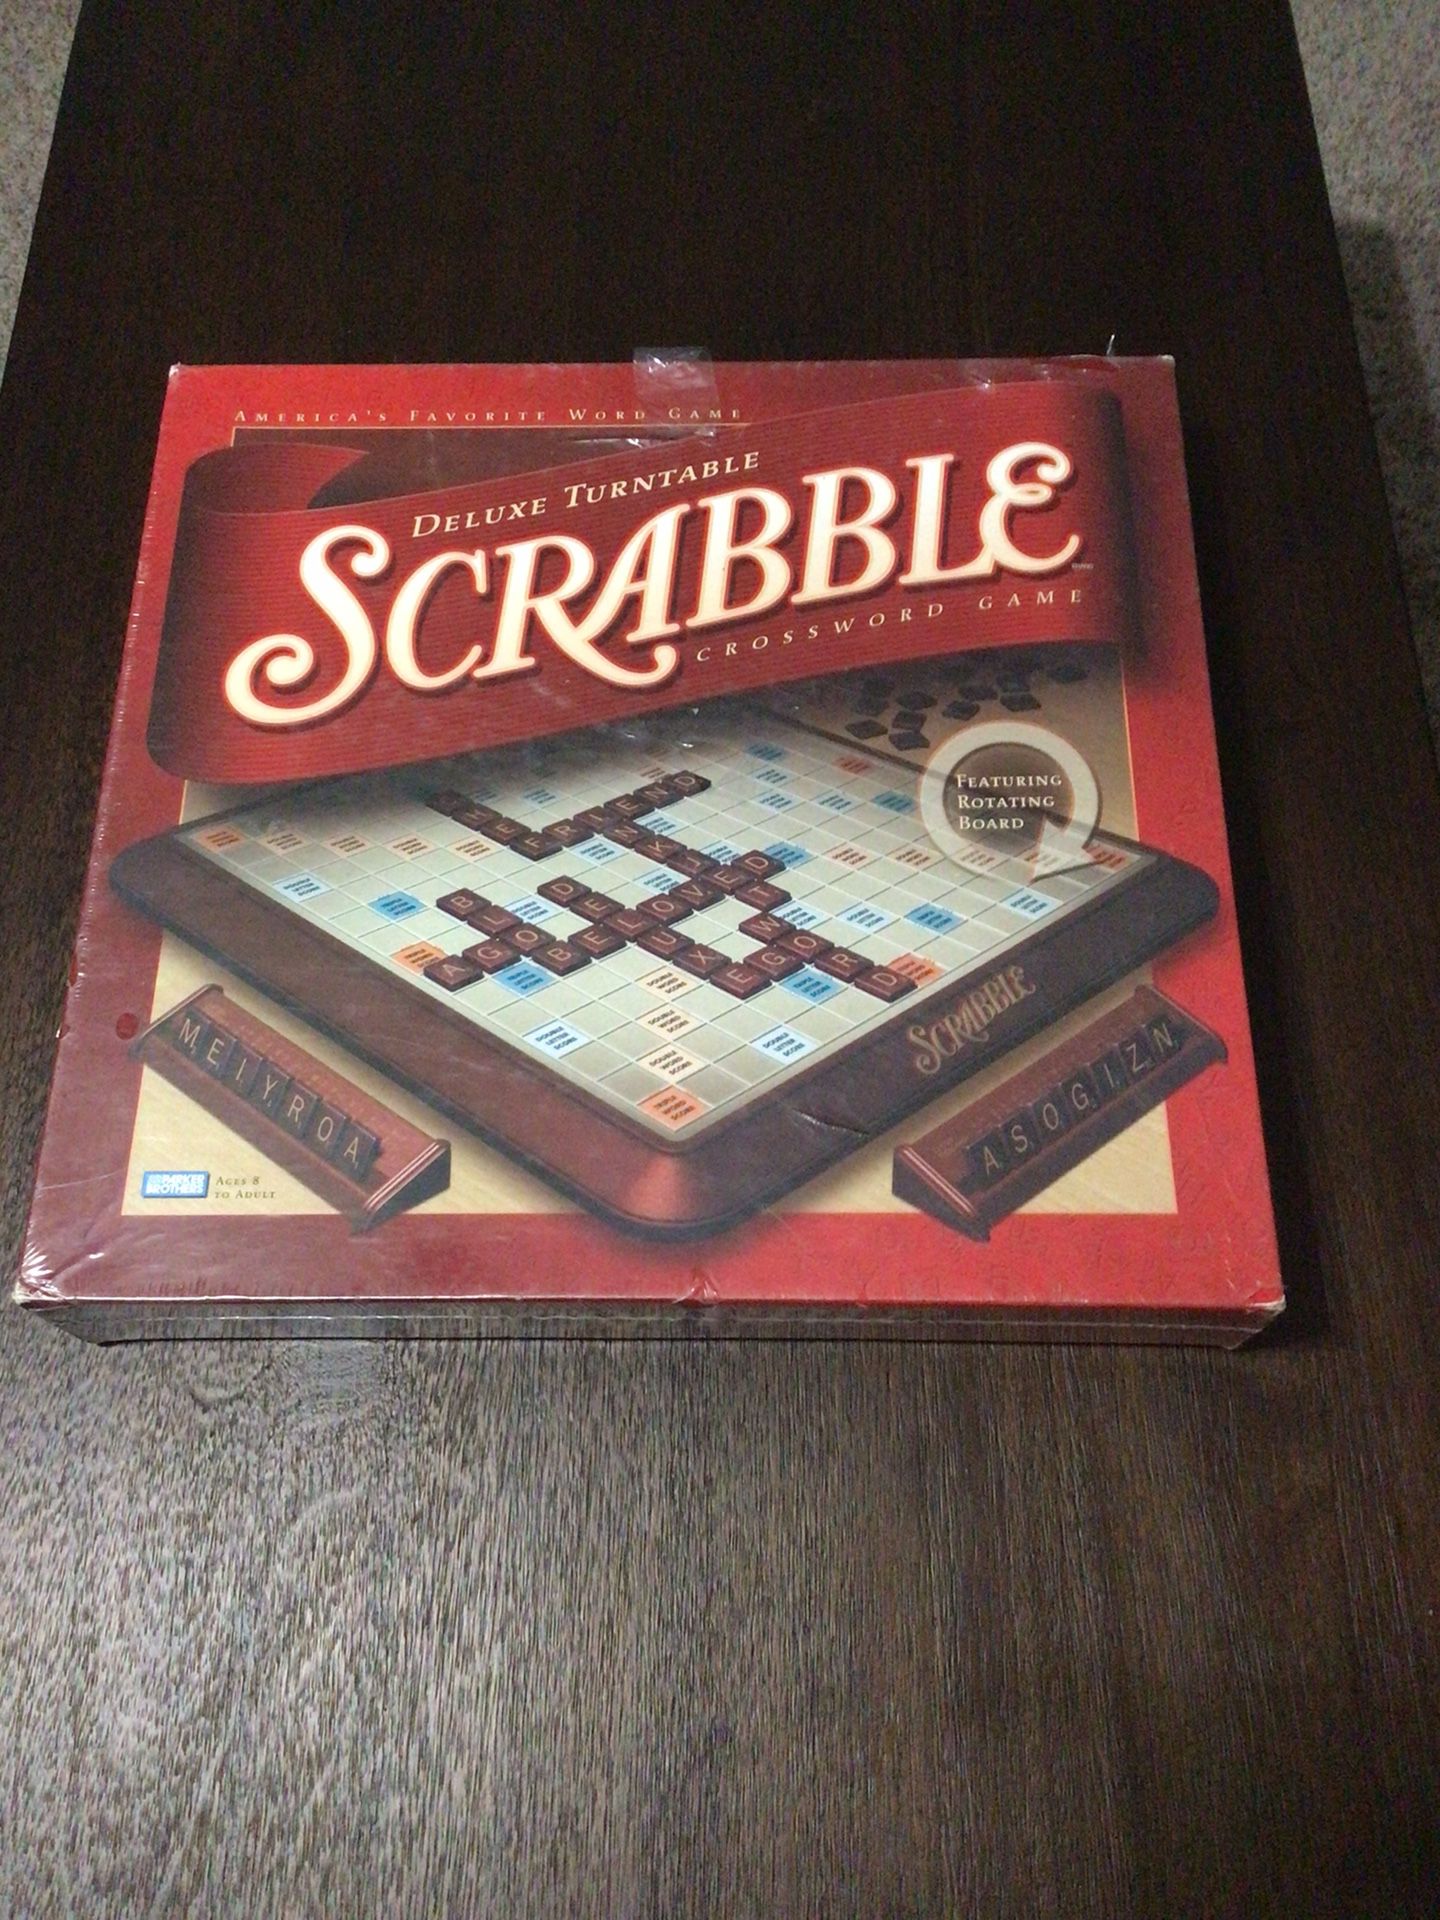 Vintage Turn Table  SCRABBLE  Game  “Brand New  Never Been Open “ $65 Hard To Find  New